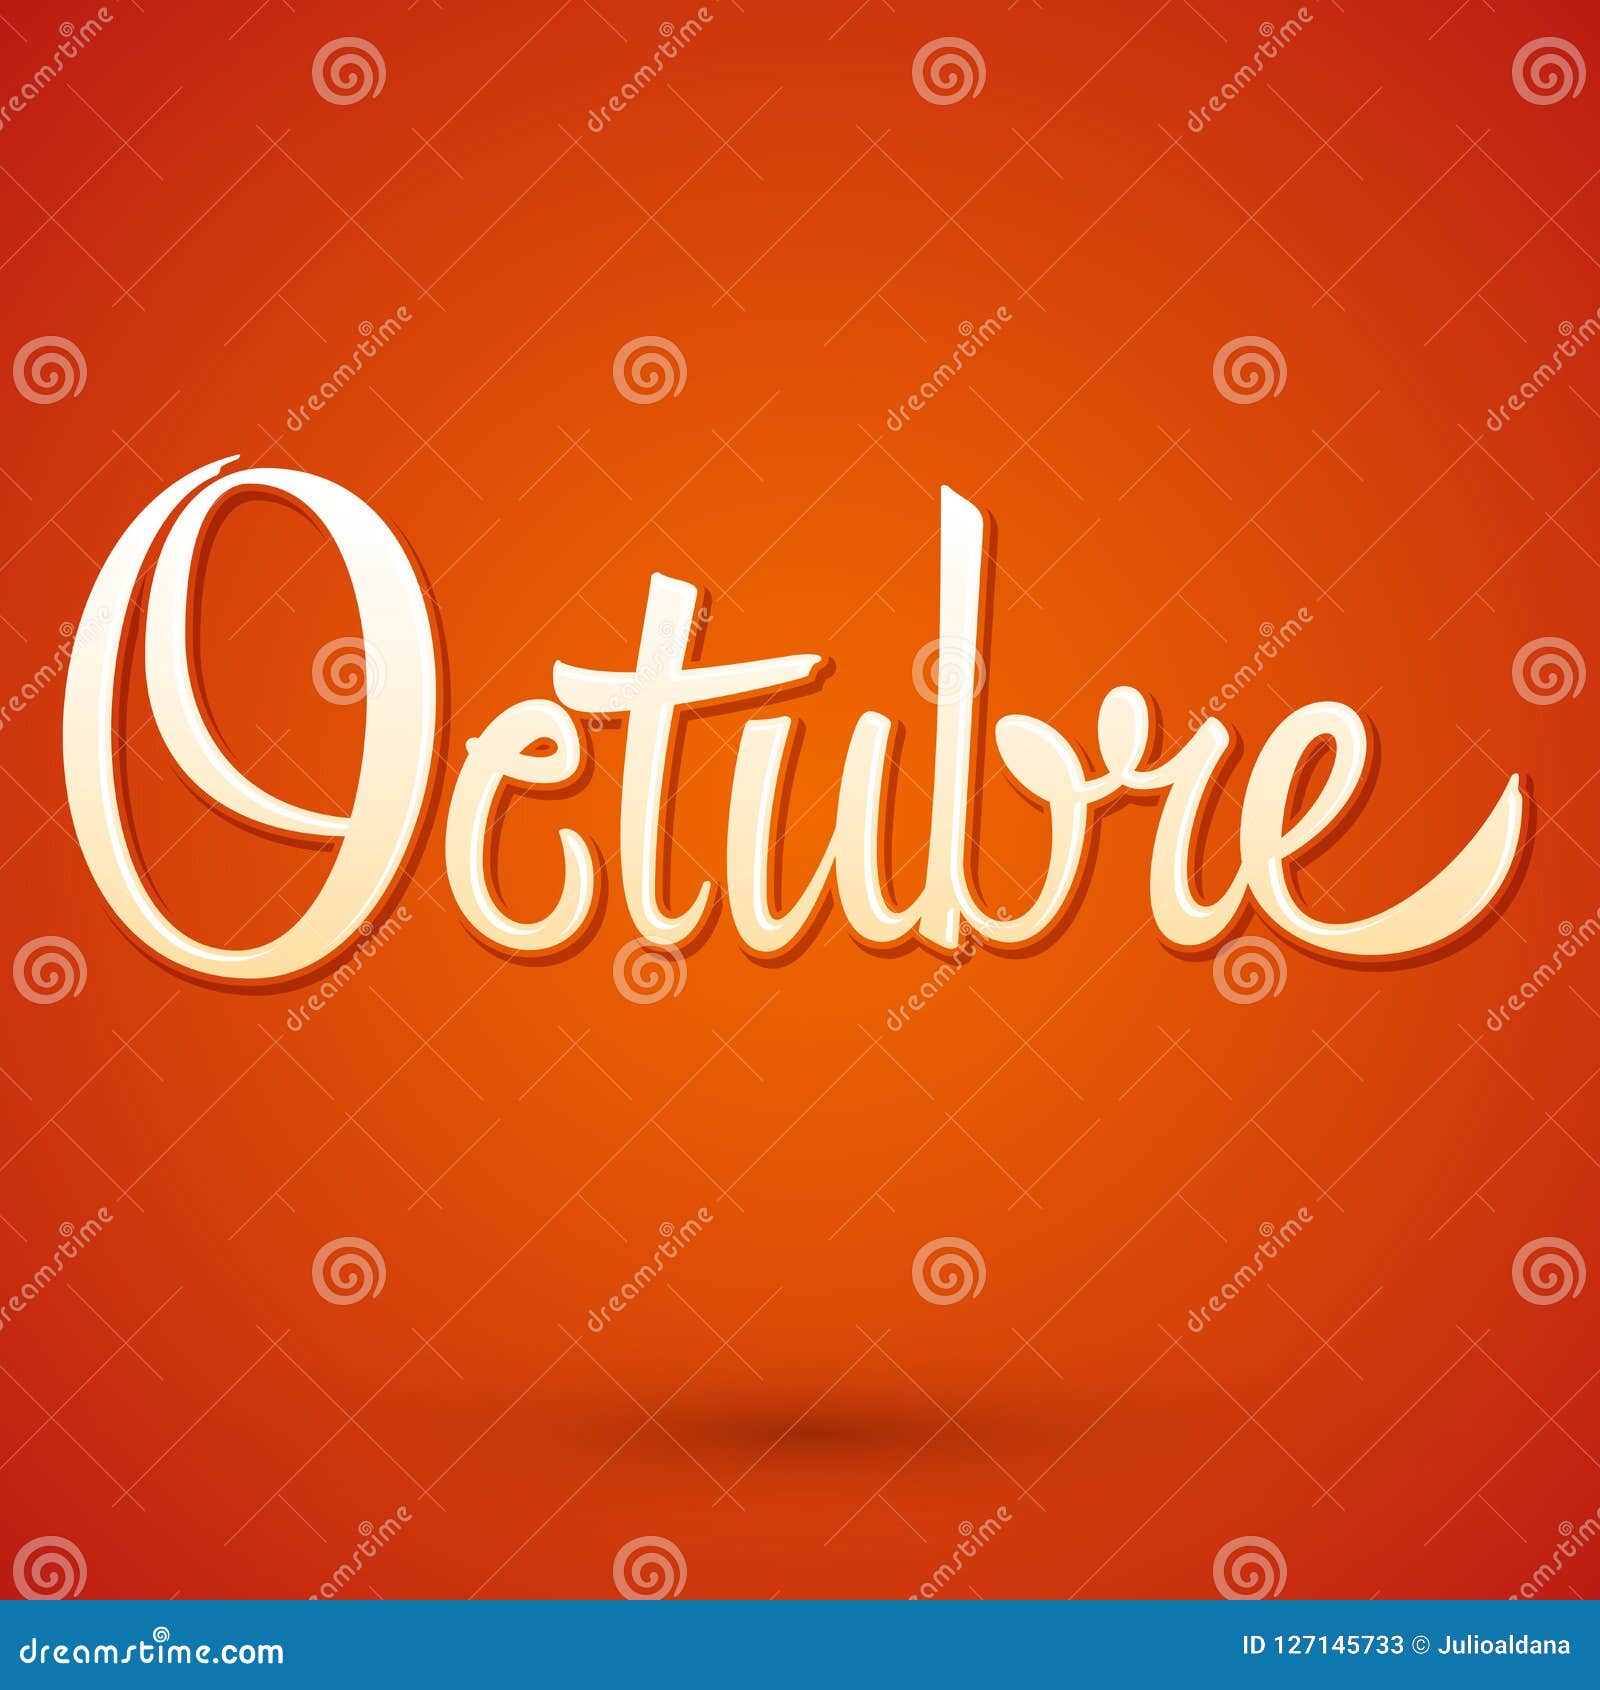 octubre, october spanish  sign lettering, icon emblem 